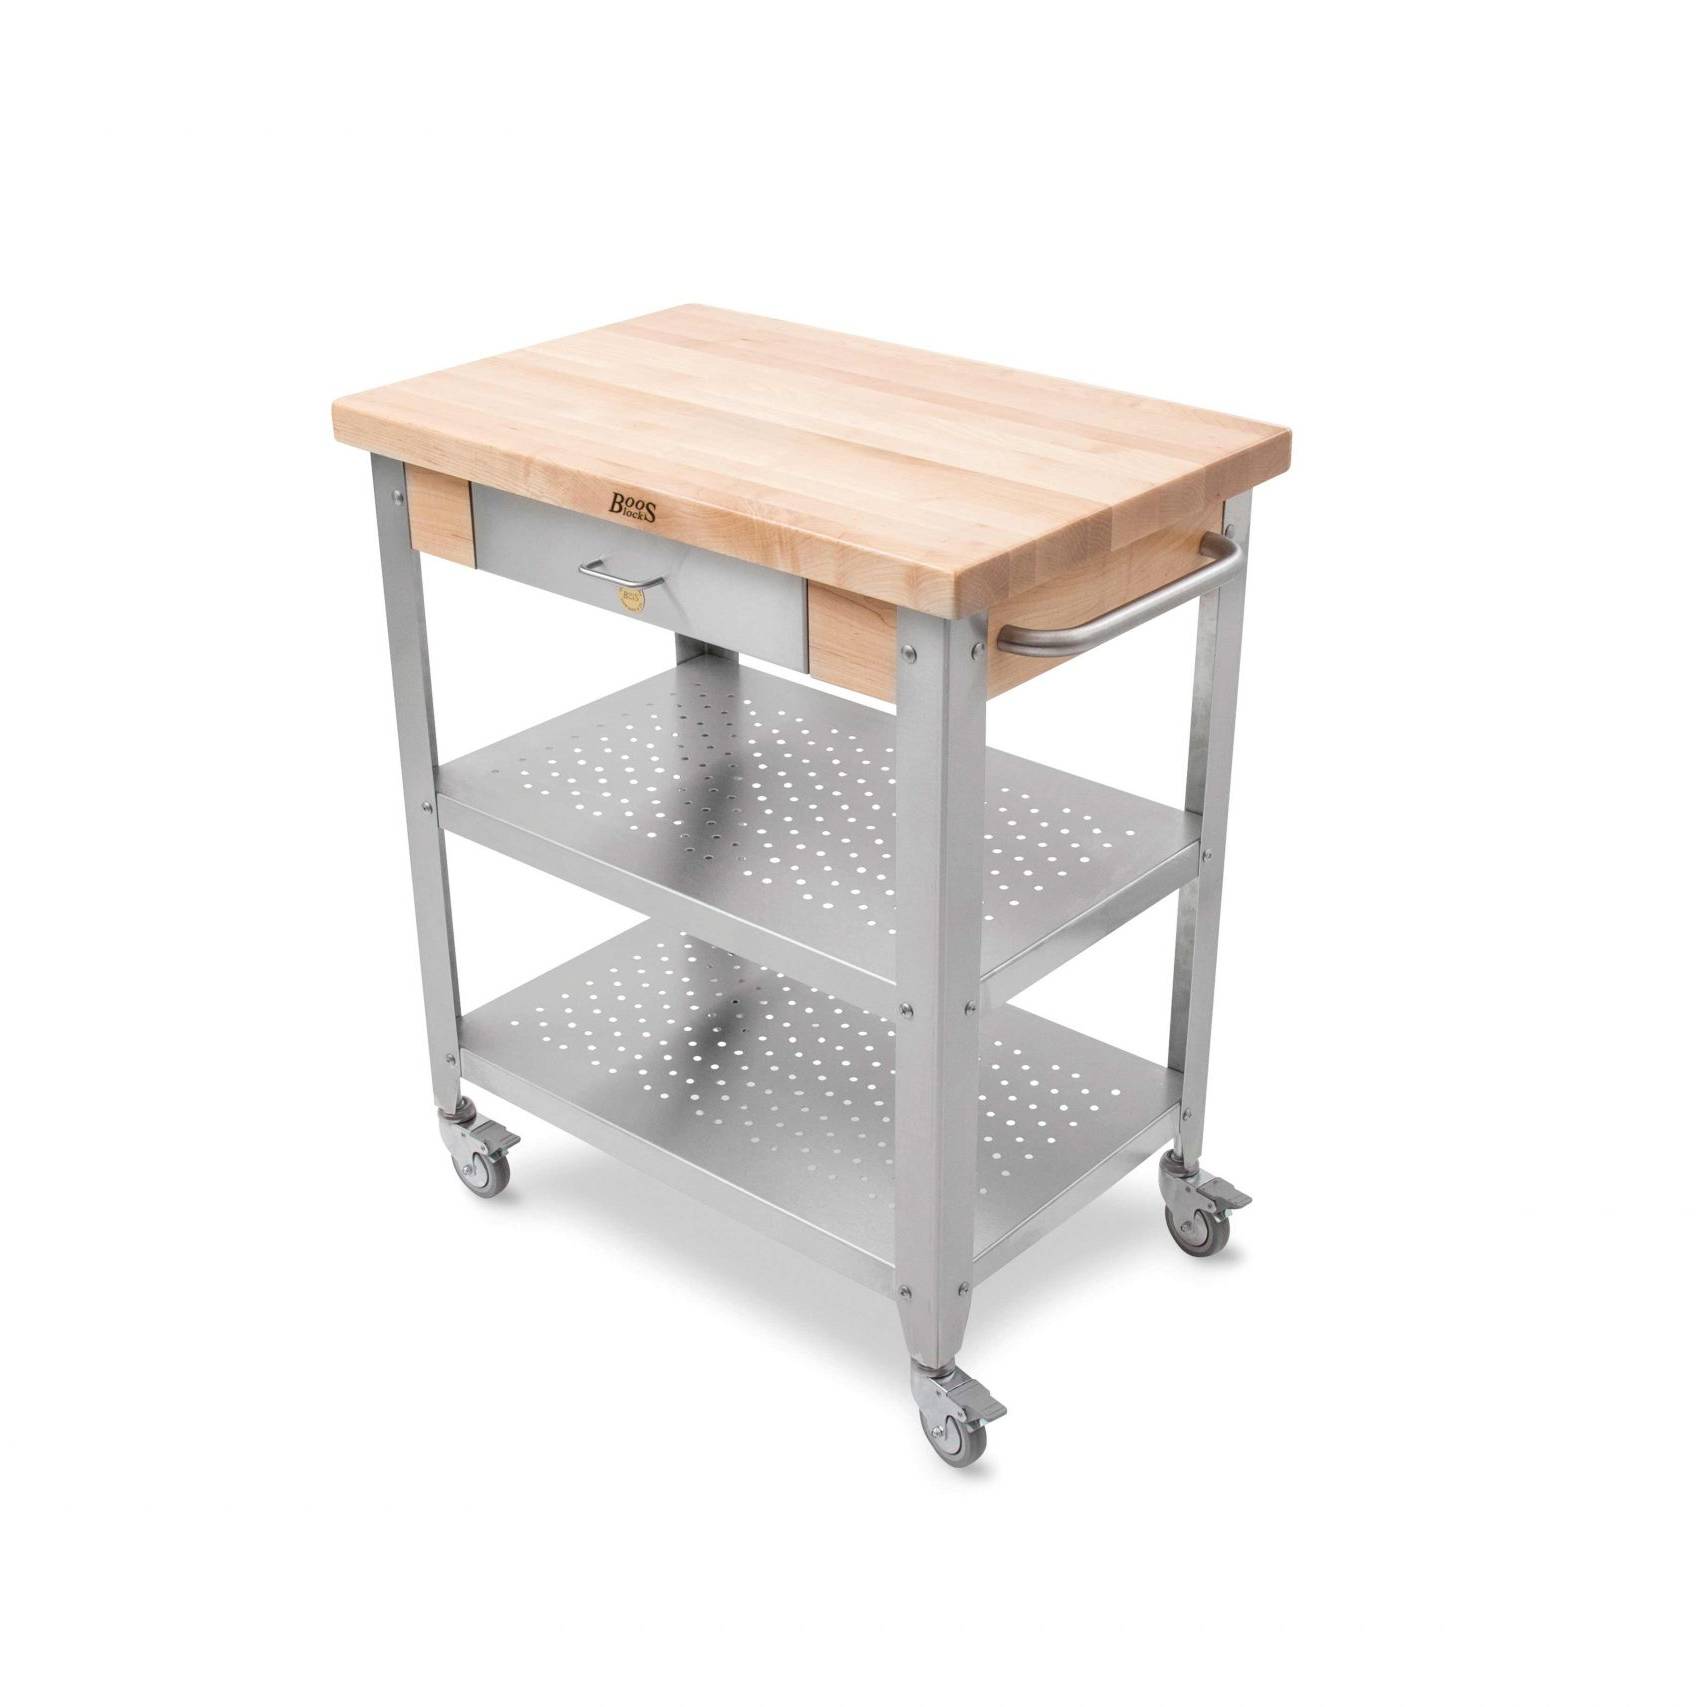 Cucina Kitchen &amp; serving cart with long wood hard maple countertop with Varnique finish and stainless steel base with drawer and two shelves, towel rack; lockable casters 7